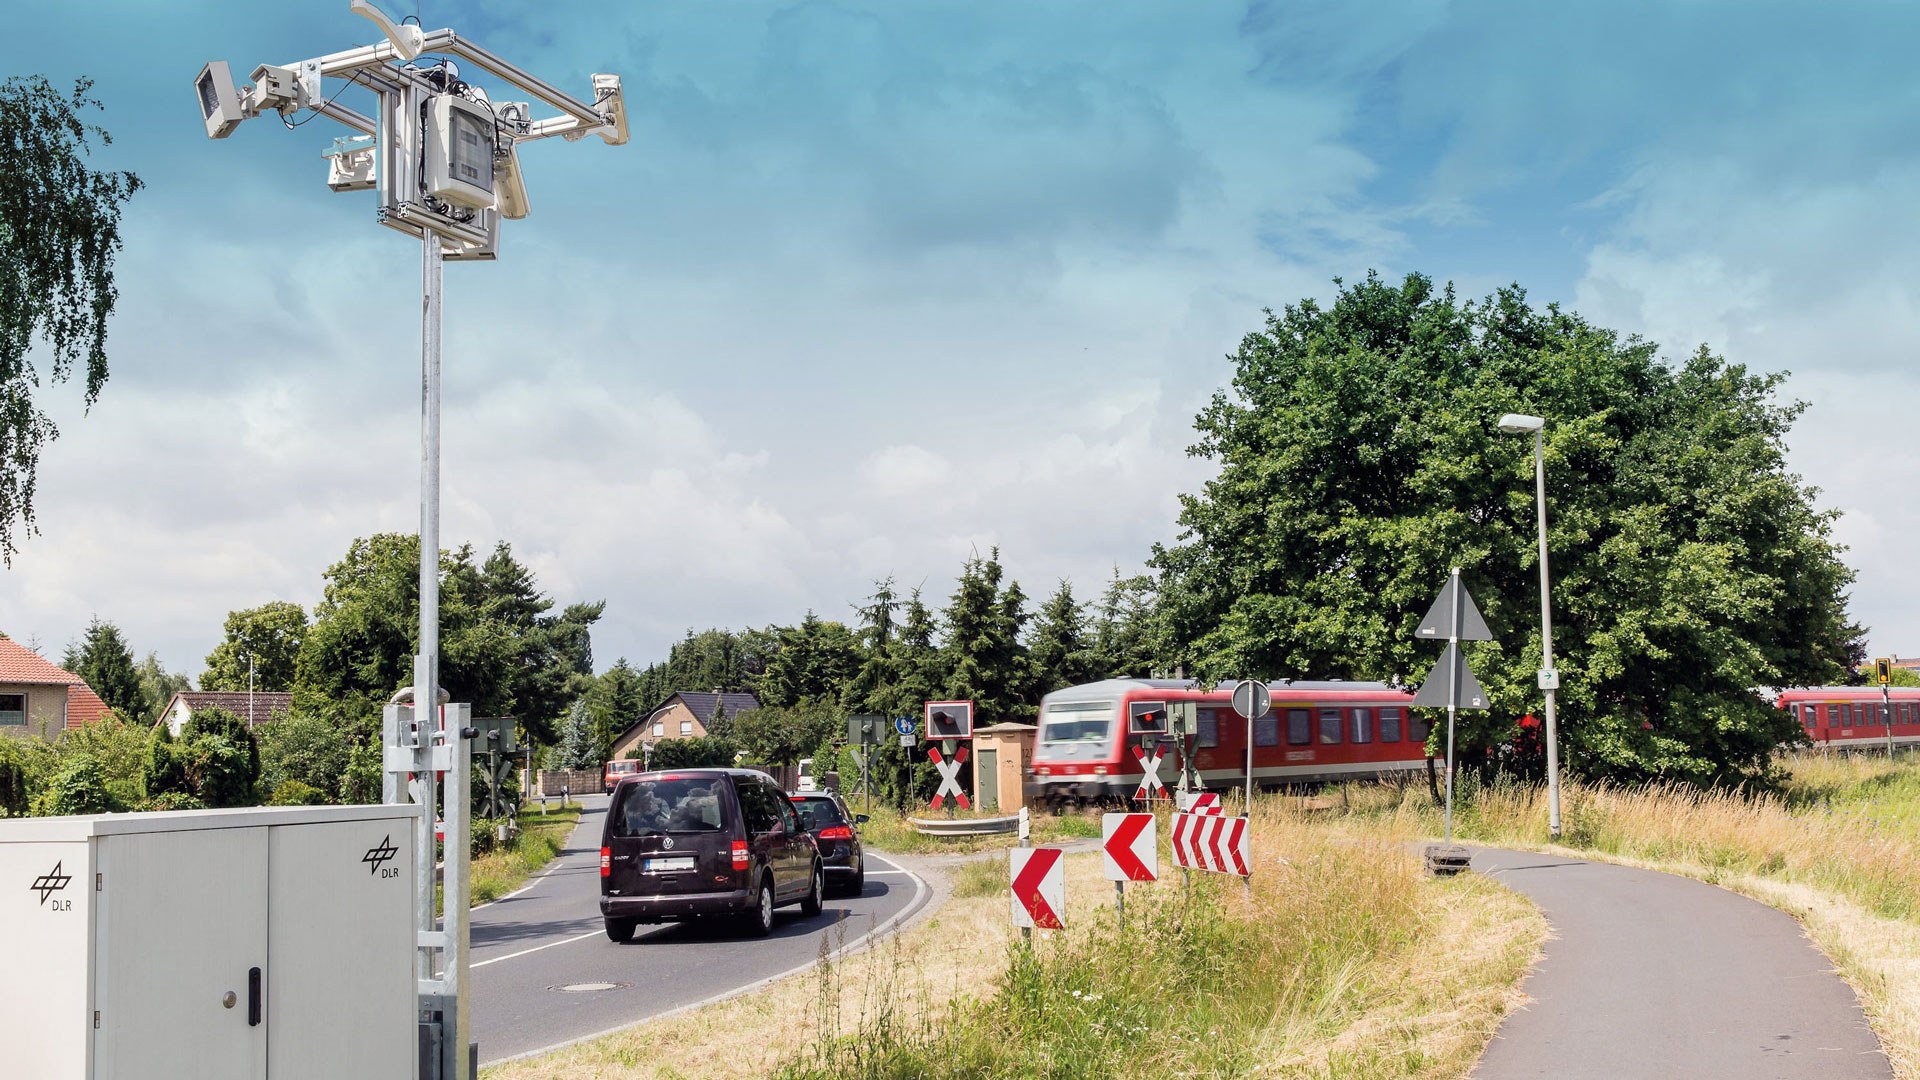 Investigation of traffic behaviour at a level crossing in Braunschweig